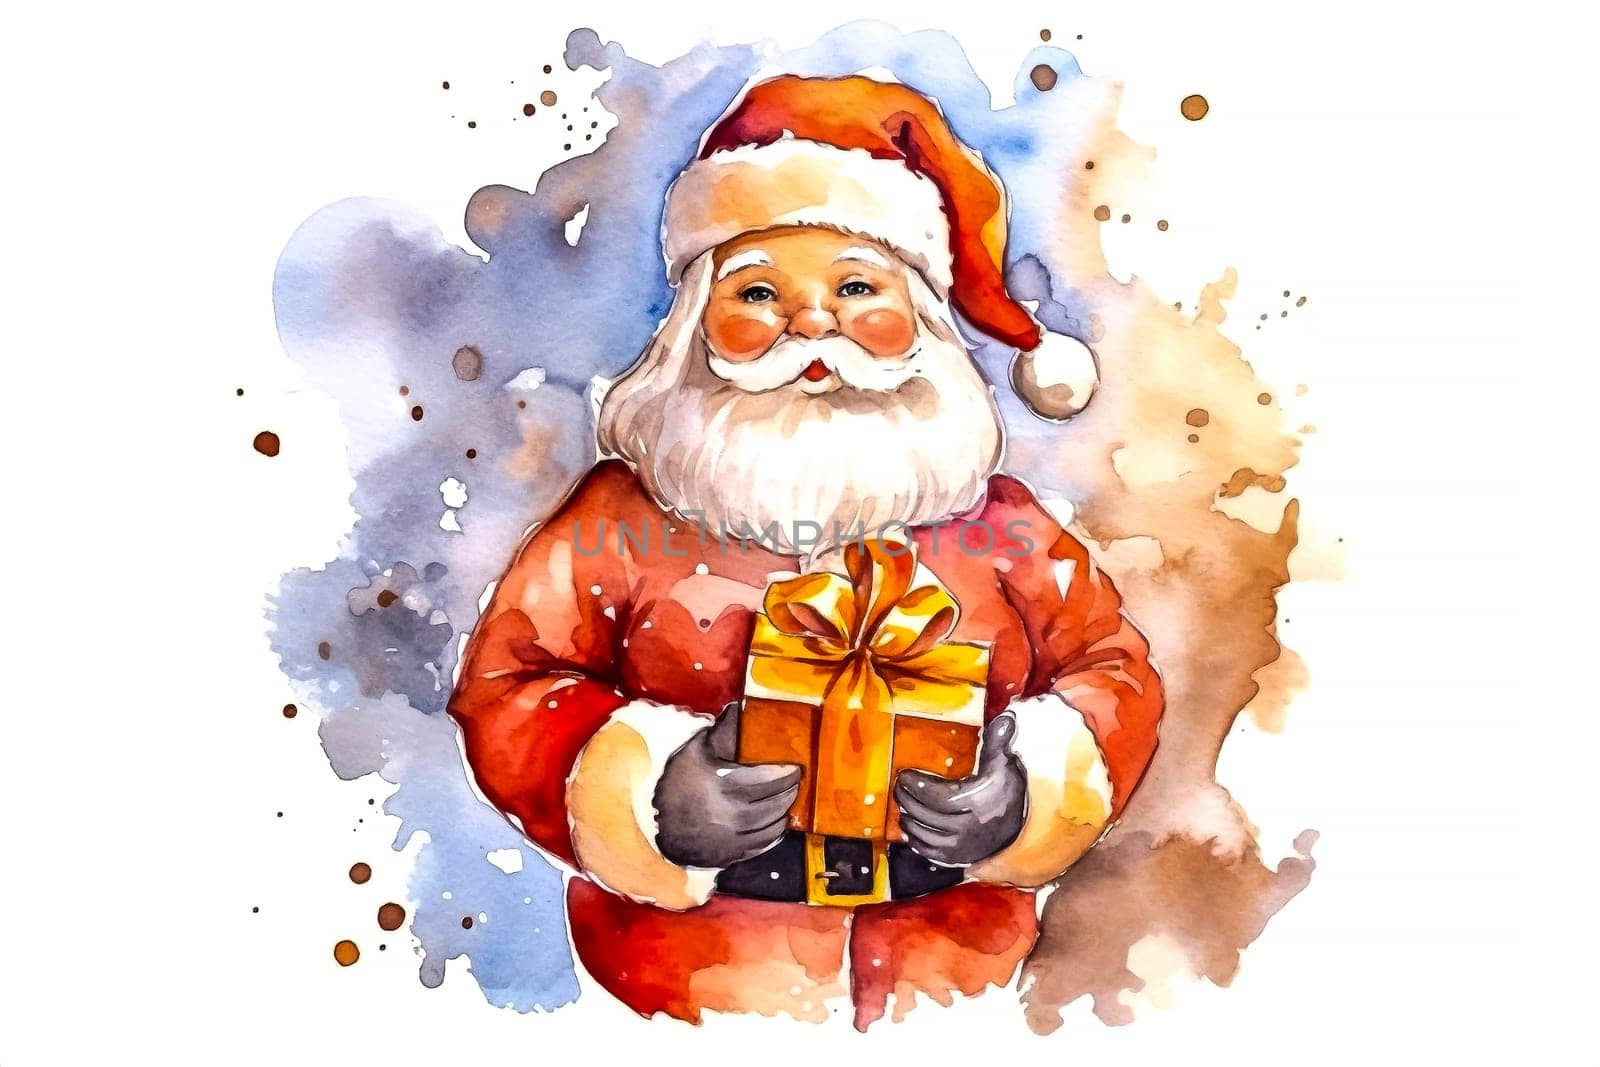 Charming watercolor scene, Santa Claus with gifts, embodying the spirit of Christmas and New Year celebrations a visual delight for the season